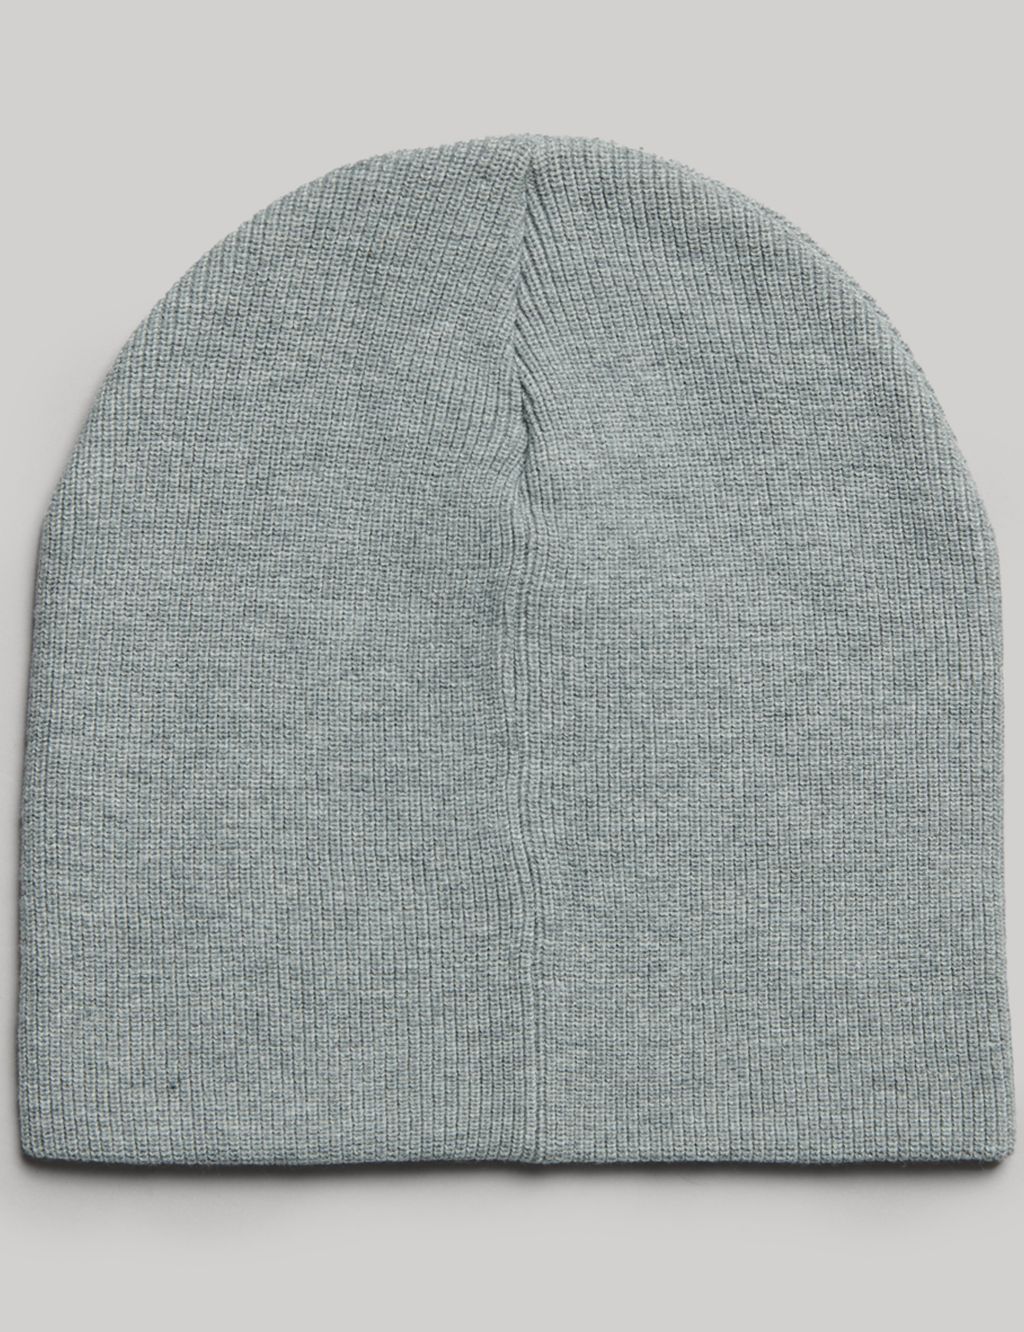 Pure Cotton Knitted Beanie Hat image 3